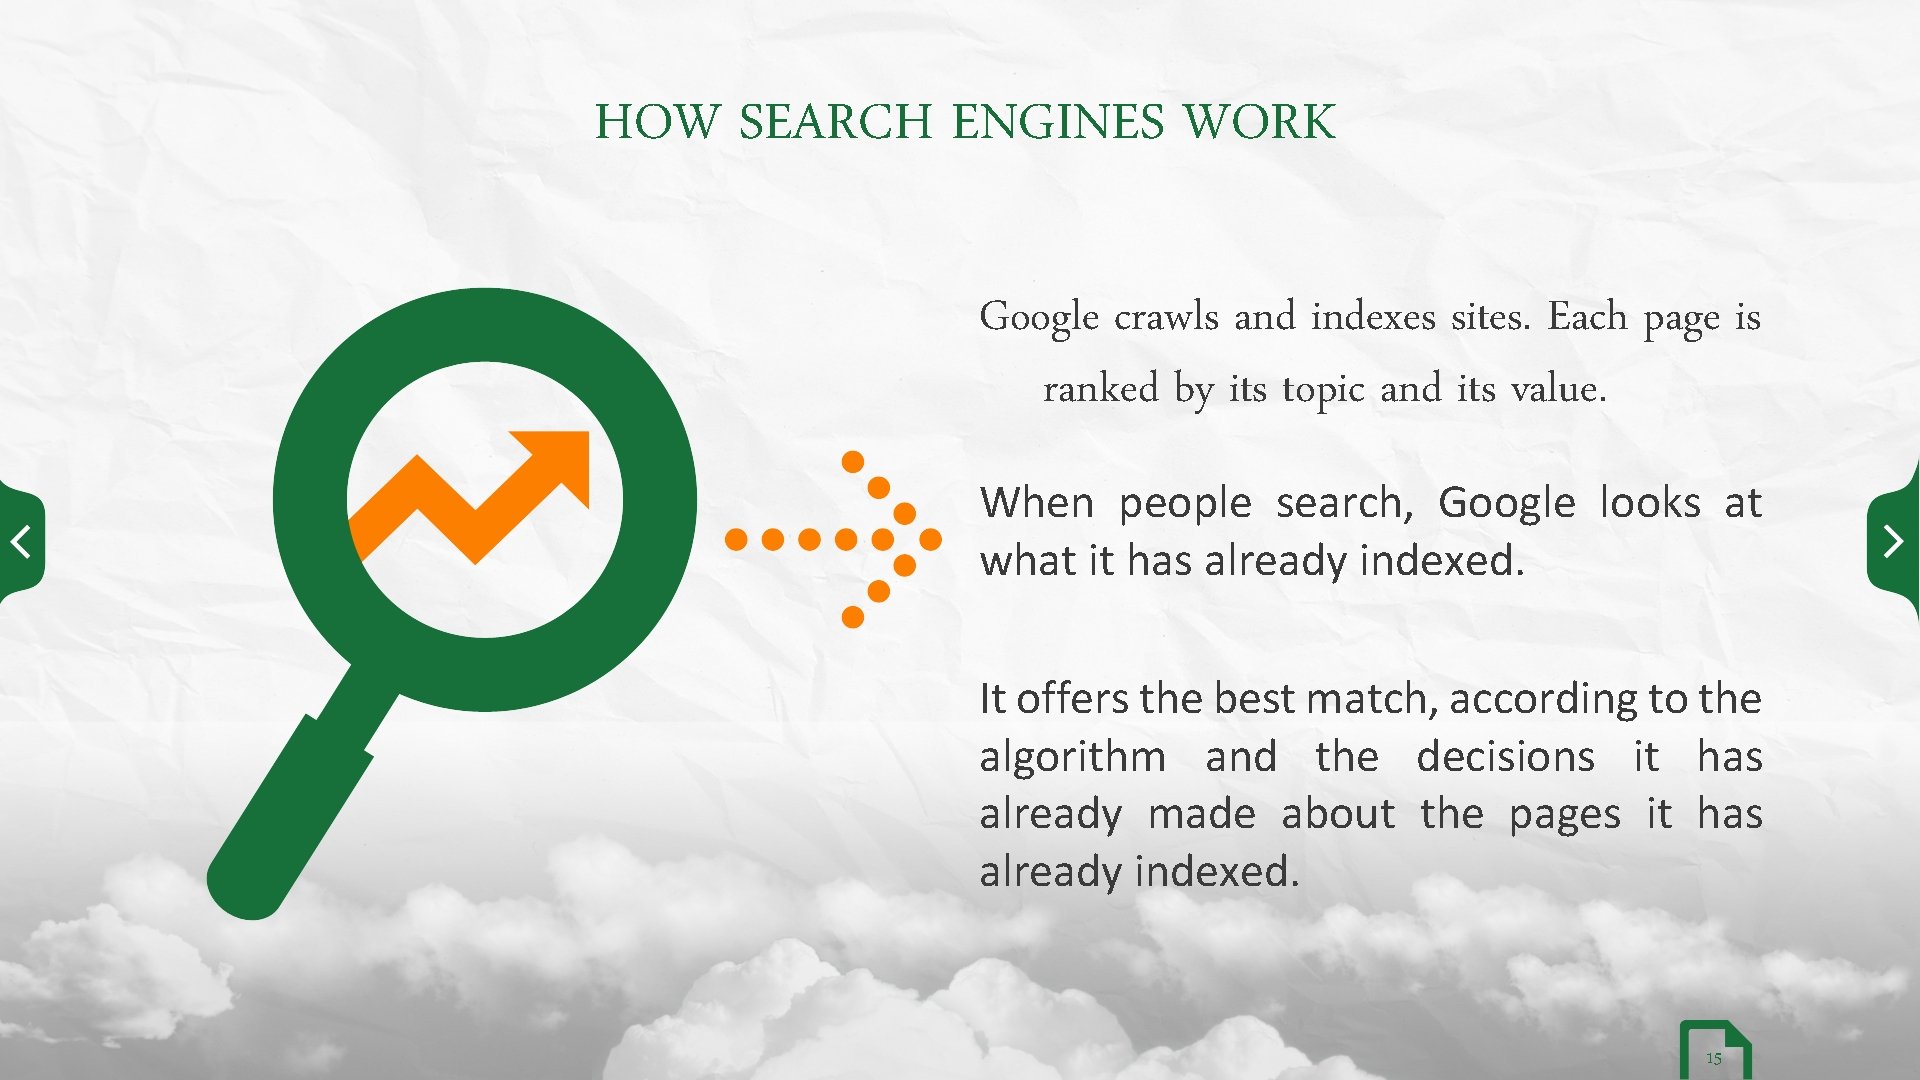 HOW SEARCH ENGINES WORK Google crawls and indexes sites. Each page is ranked by